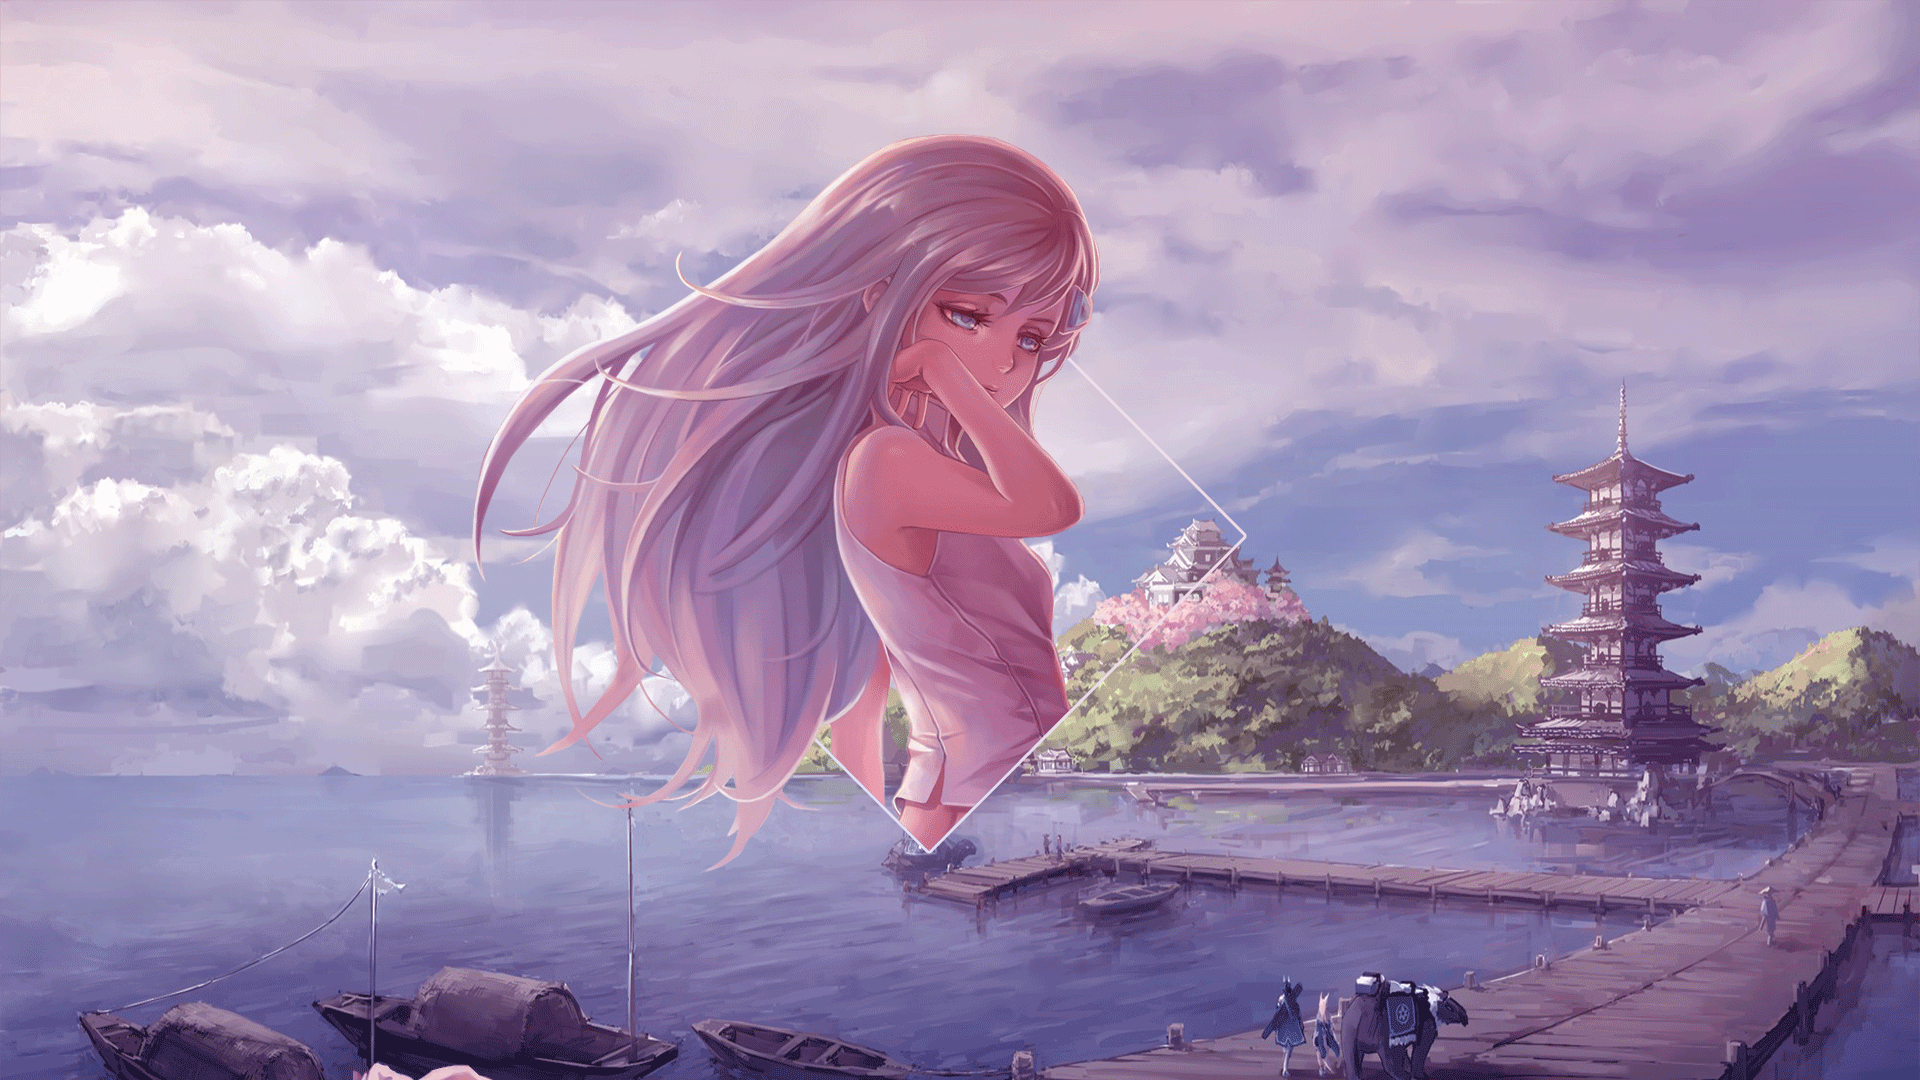 Anime Anime Girls Anime Landscape Clouds Sea Picture In Picture Photohop Digital Art Silver Hair Bl Wallpaper:1920x1080